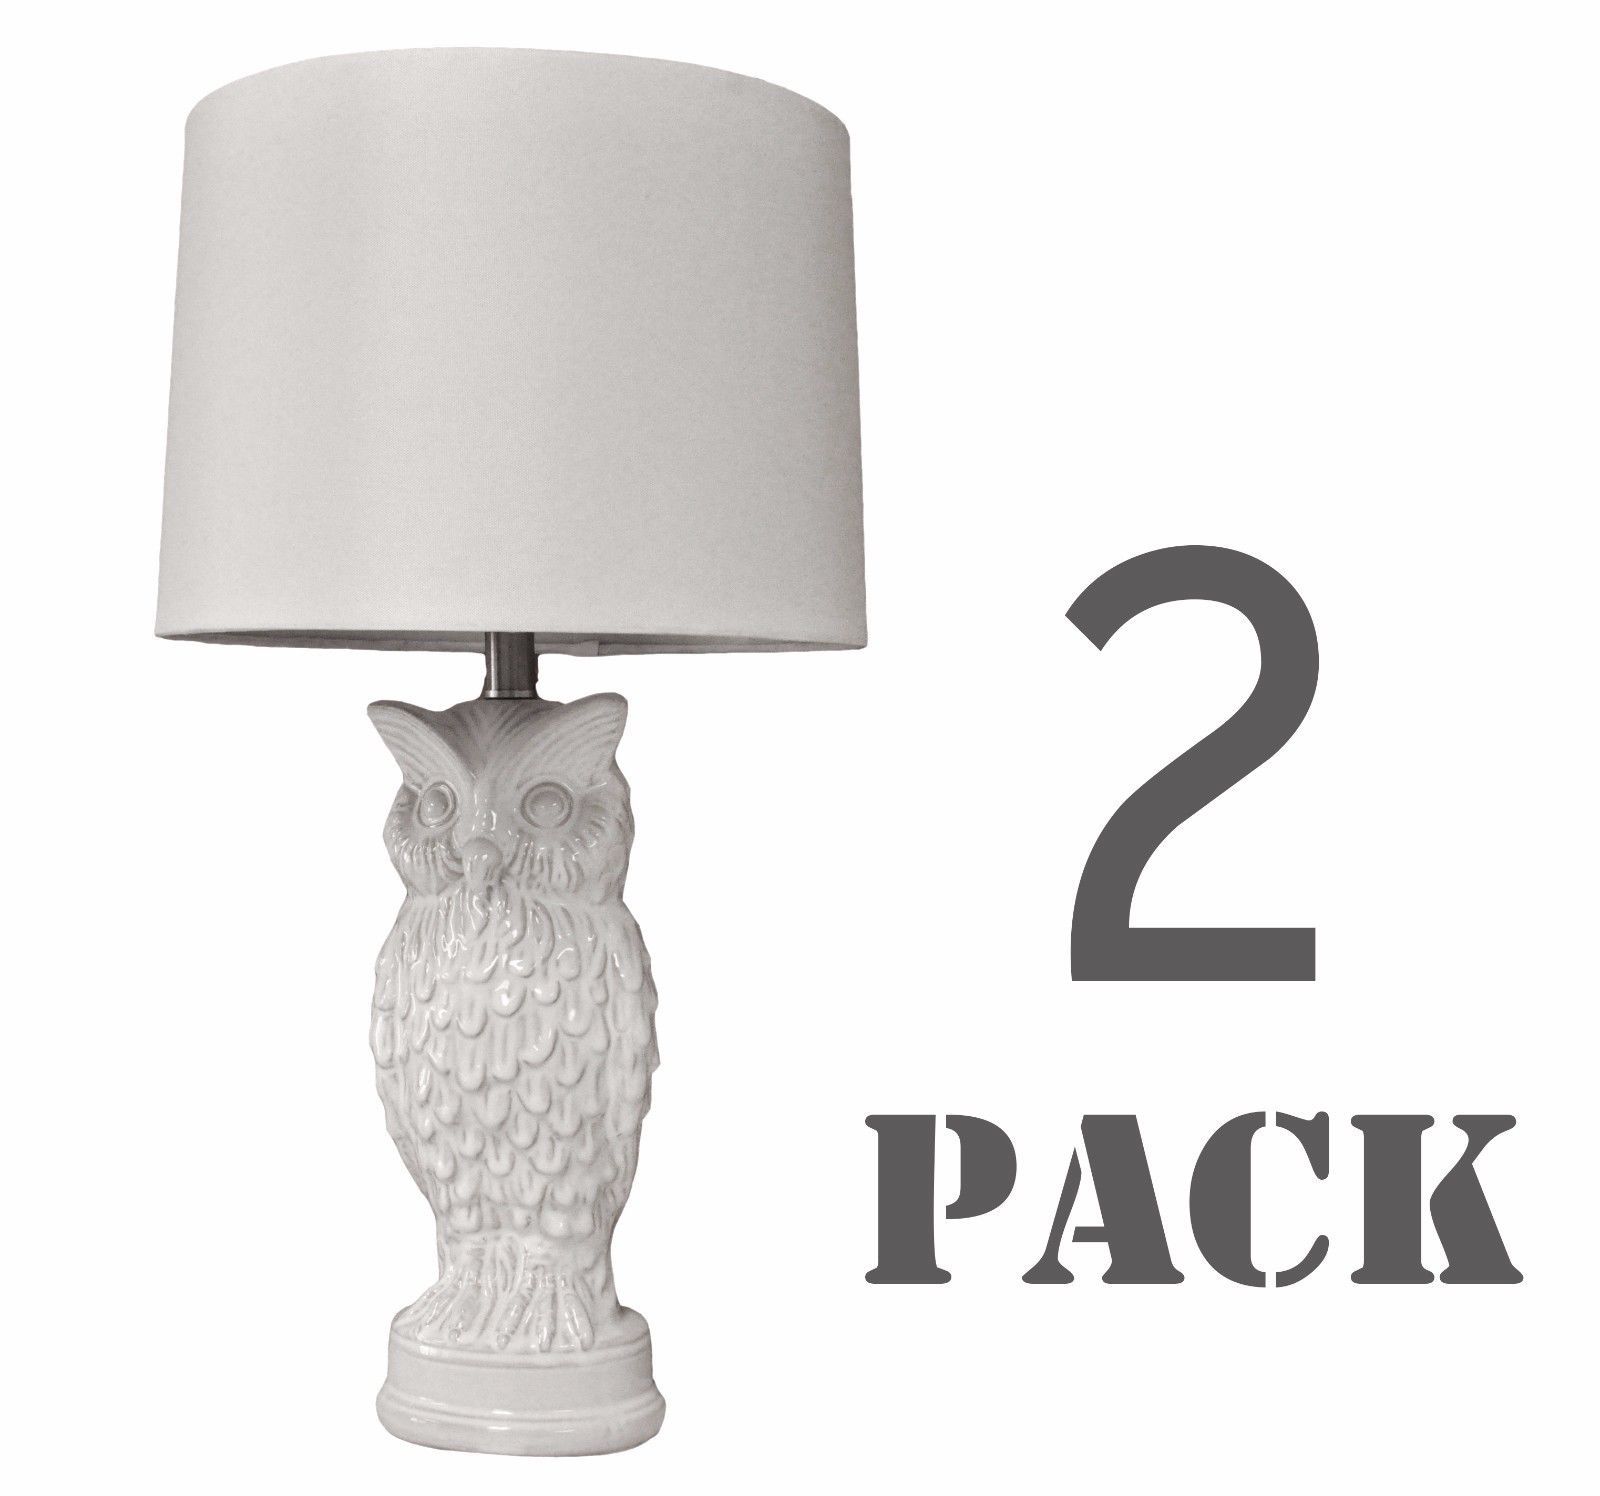 Set Of 2 White Owl Ceramic Table Lamp For Bedroom Living Room – 27"h In Set Of 2 Living Room Table Lamps (View 14 of 15)